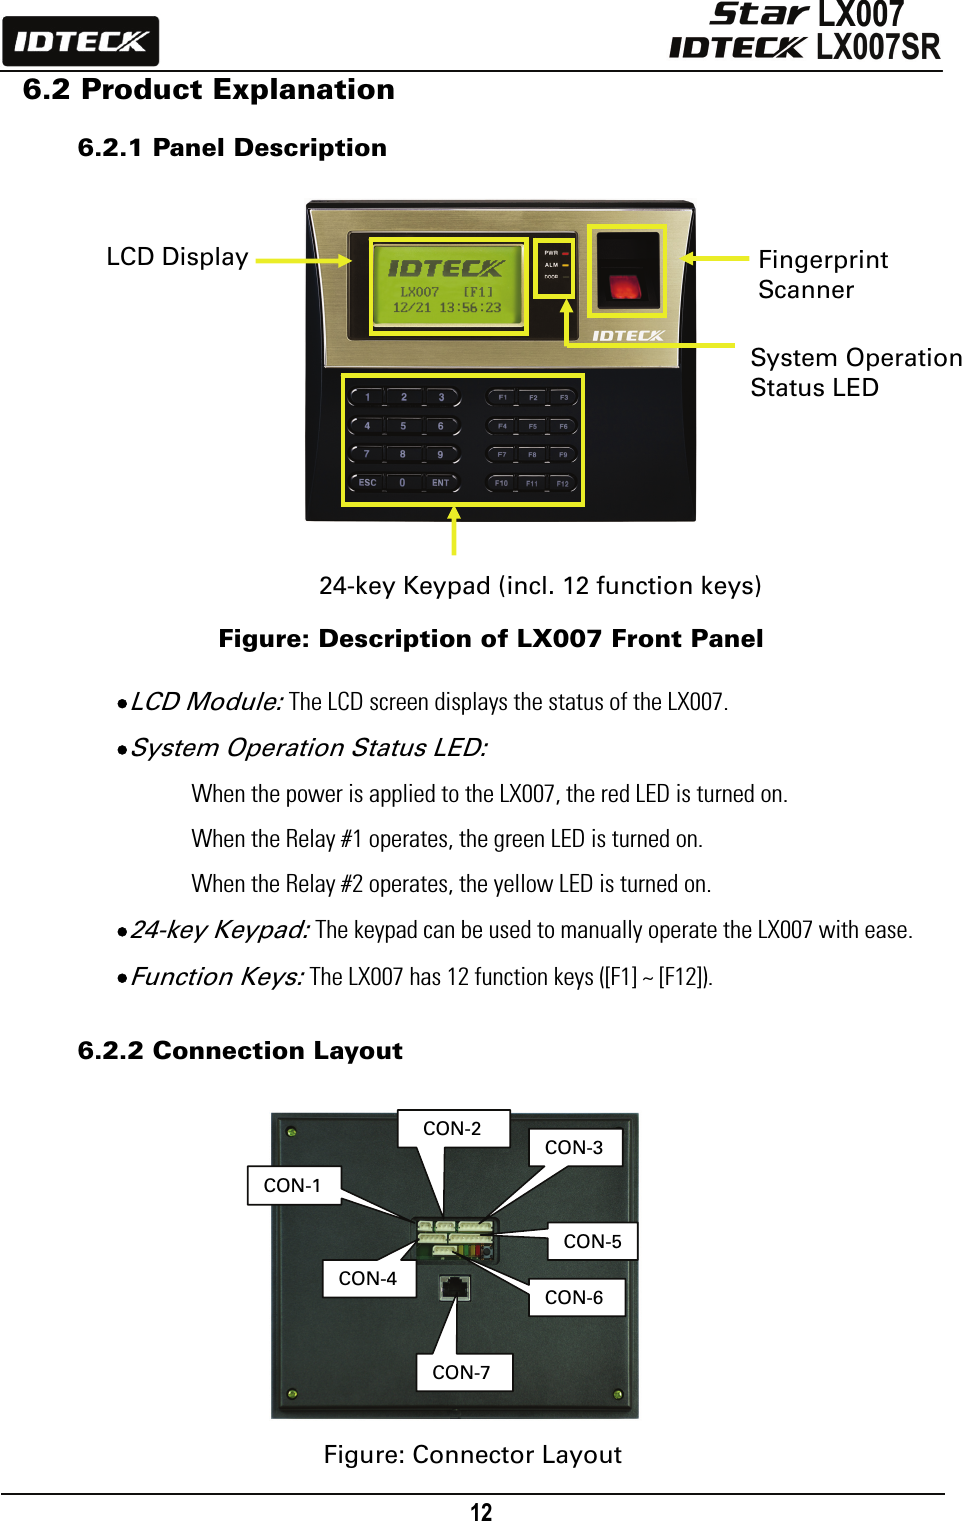                                                                                    12      6.2 Product Explanation  6.2.1 Panel Description                                                 Figure: Description of LX007 Front Panel  • LCD Module: The LCD screen displays the status of the LX007.   • System Operation Status LED: When the power is applied to the LX007, the red LED is turned on.   When the Relay #1 operates, the green LED is turned on.   When the Relay #2 operates, the yellow LED is turned on.   • 24-key Keypad: The keypad can be used to manually operate the LX007 with ease. • Function Keys: The LX007 has 12 function keys ([F1] ~ [F12]).  6.2.2 Connection Layout              Figure: Connector Layout 24-key Keypad (incl. 12 function keys)  Fingerprint Scanner LCD Display System Operation   Status LED  CON-2CON-1 CON-6CON-3CON-4CON-5CON-7